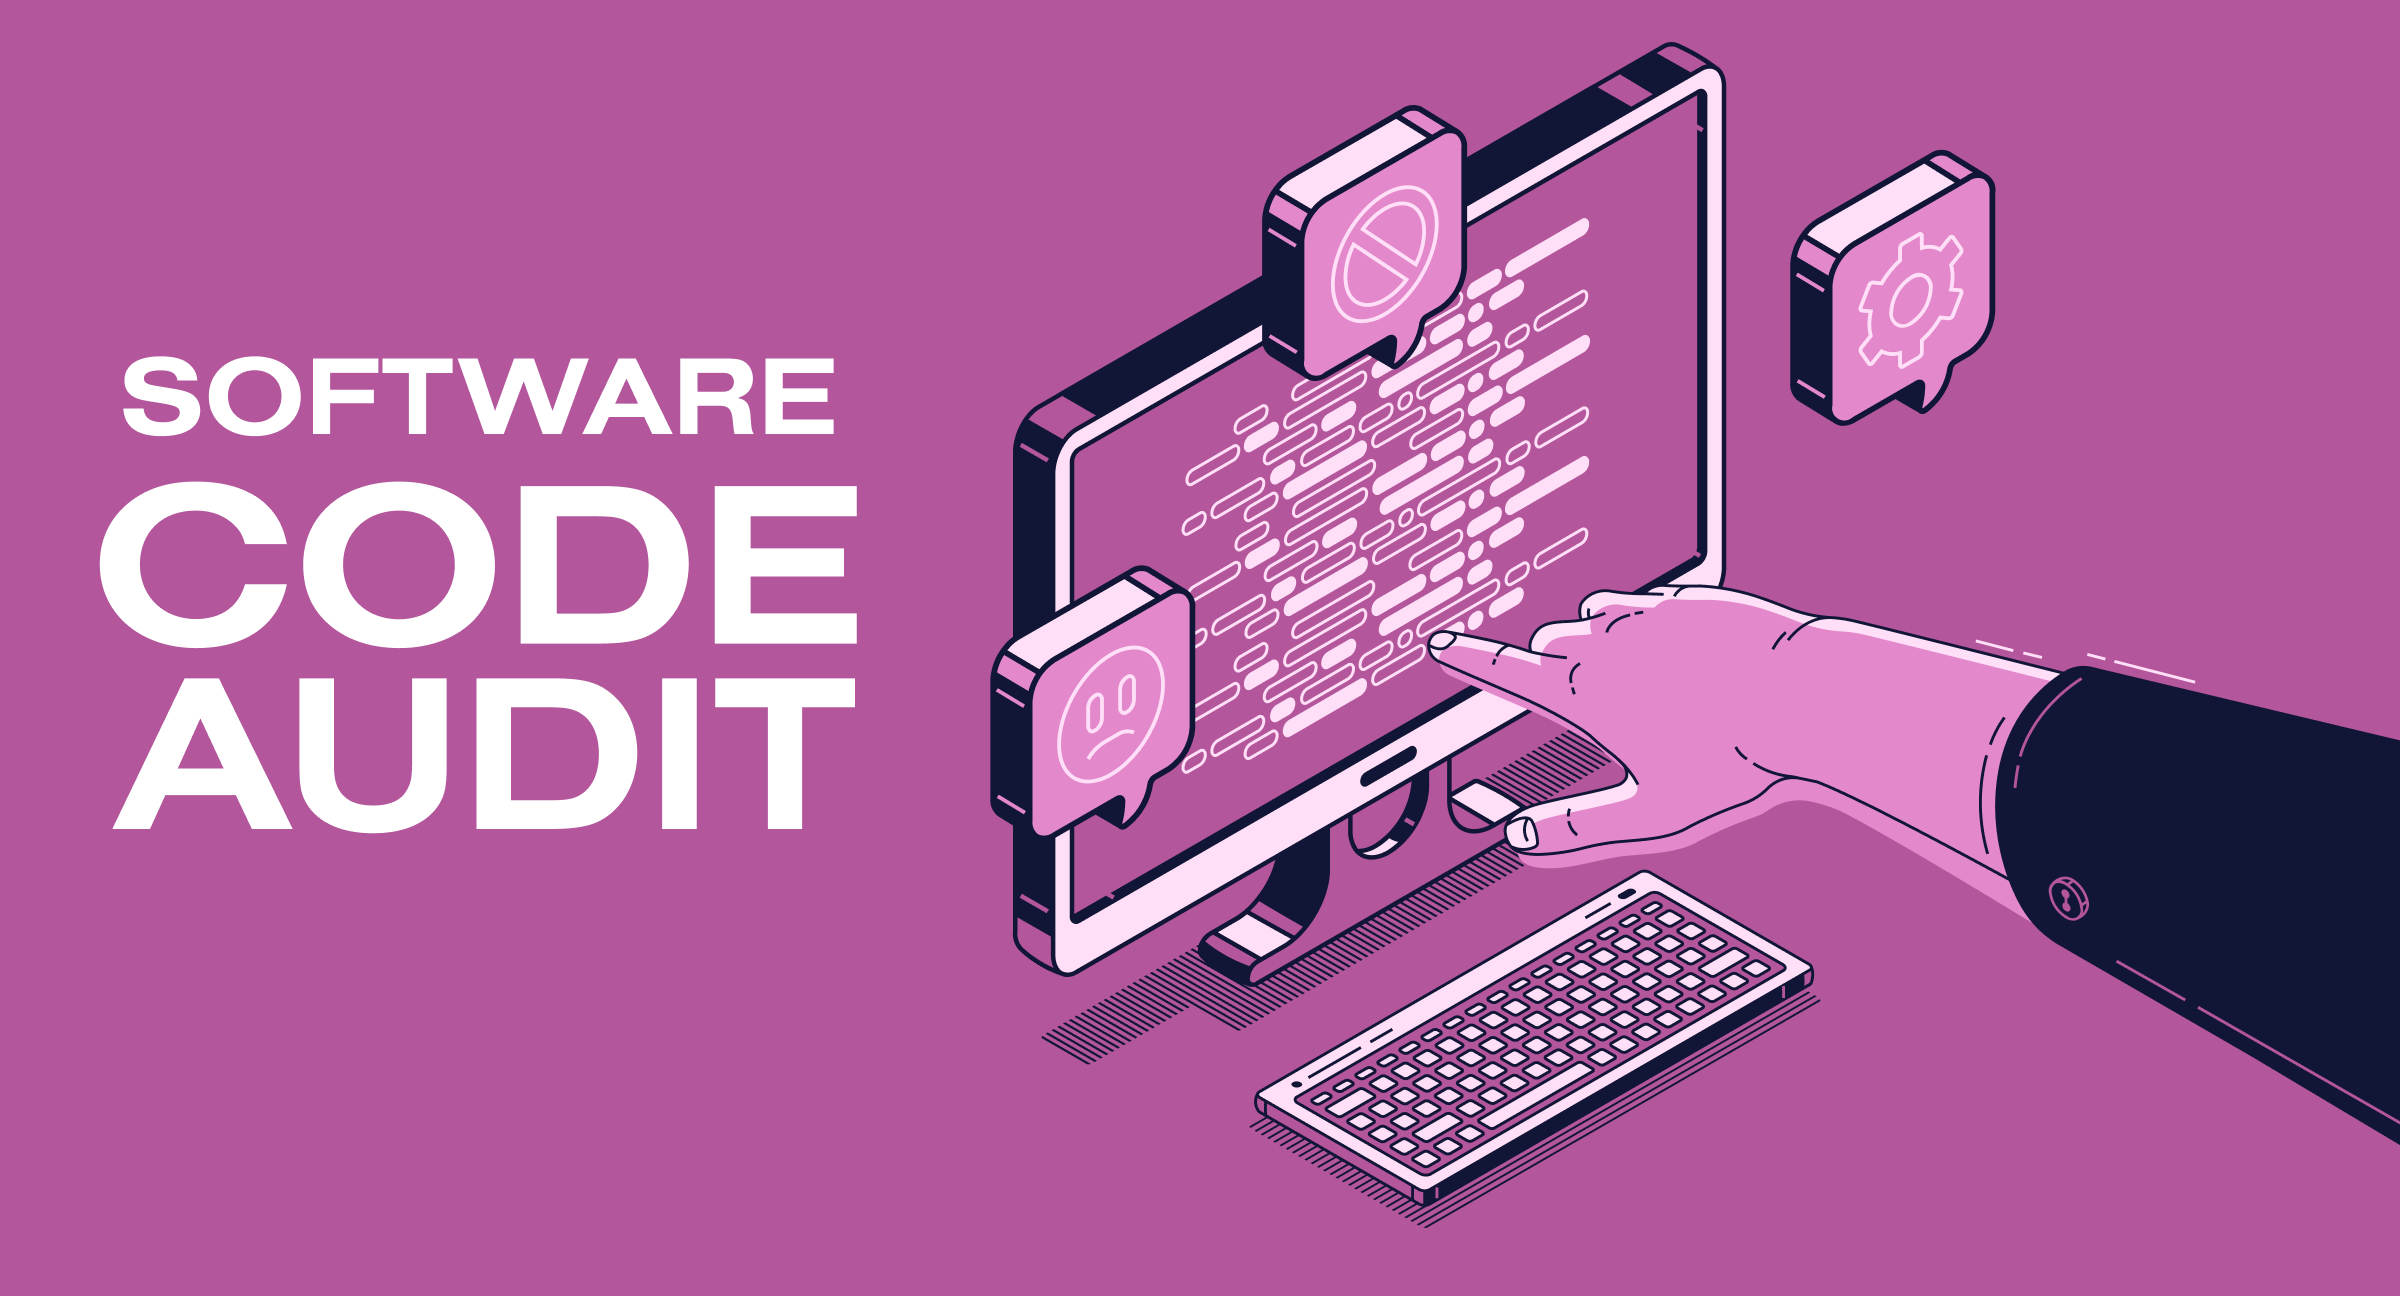 Software Code Audit: How To Make It Effective